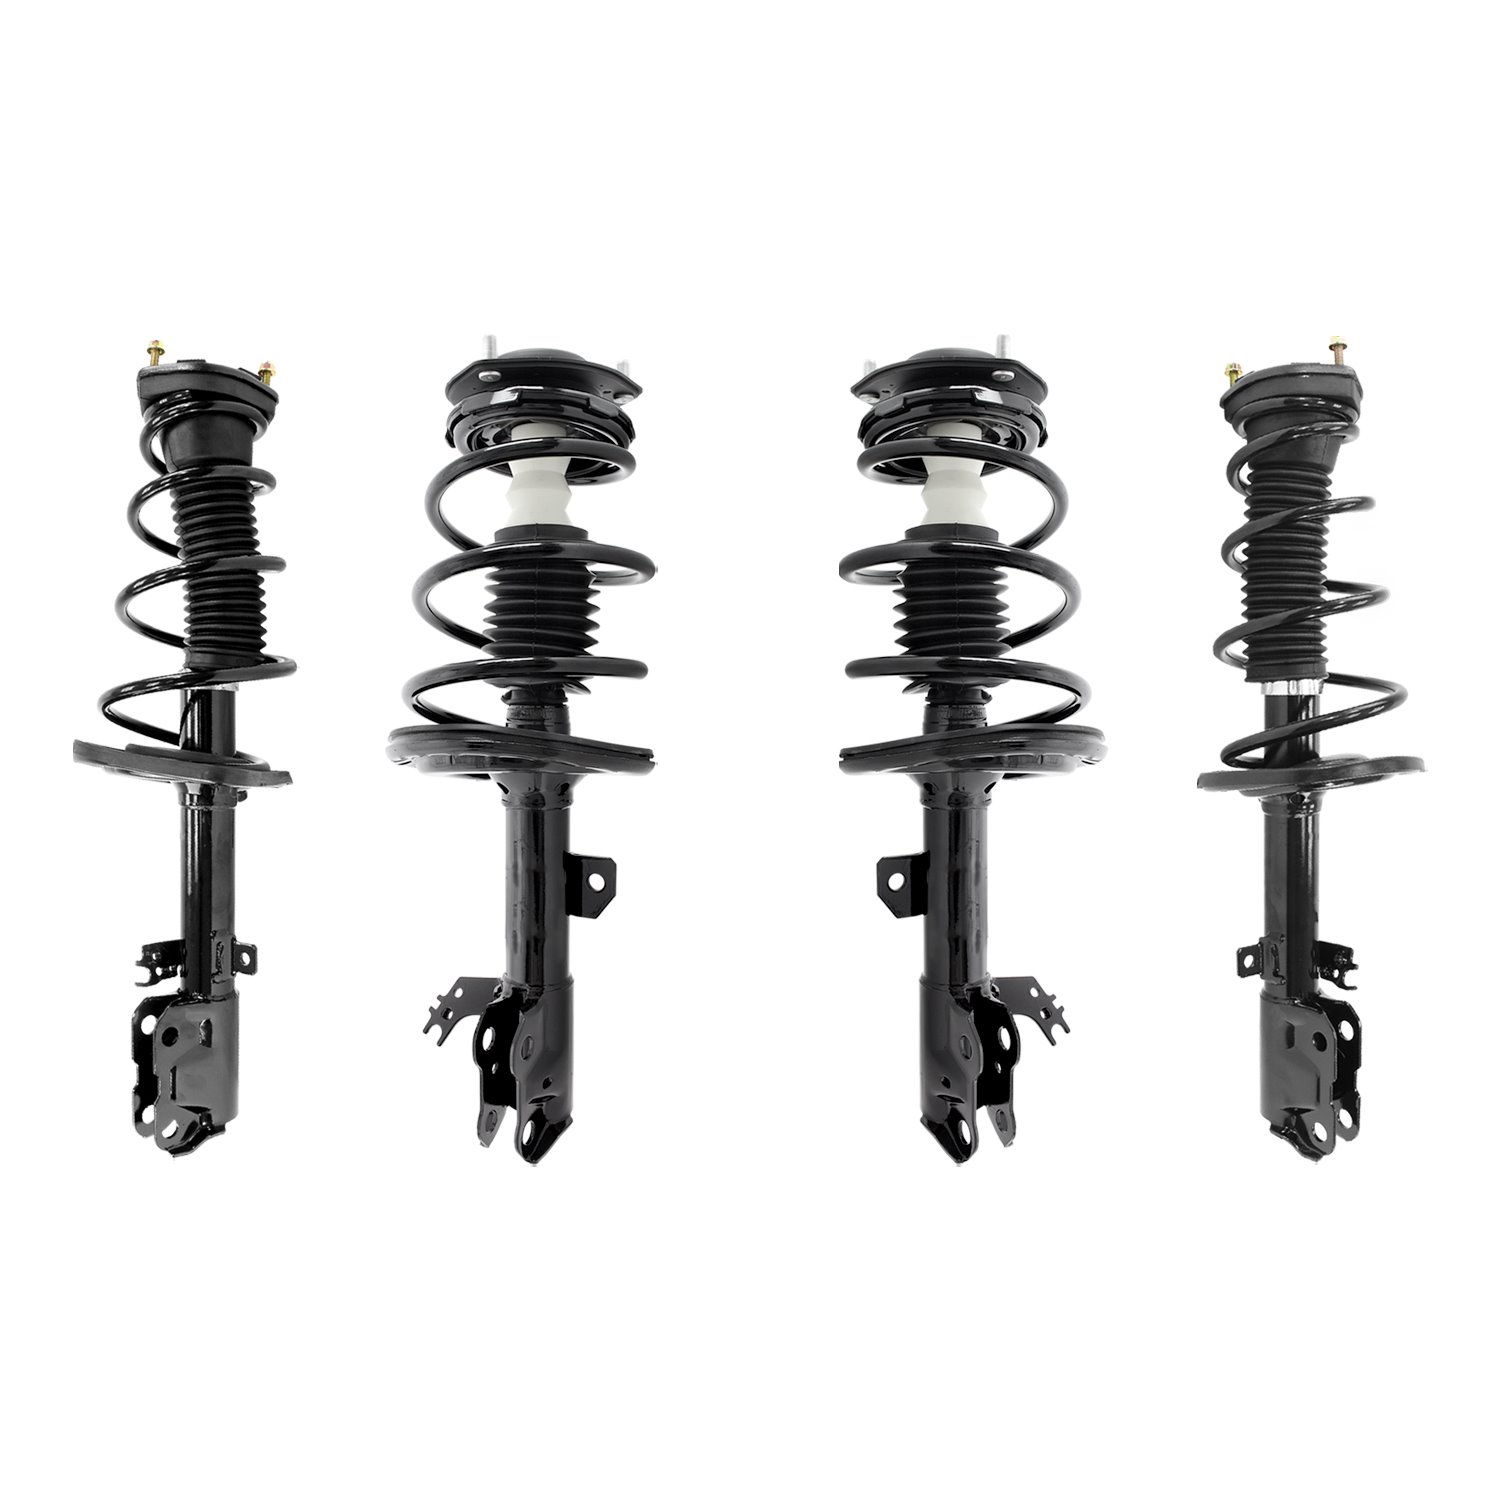 4-11975-15025-001 Front & Rear Suspension Strut & Coil Spring Assembly Kit Fits Select Toyota Camry